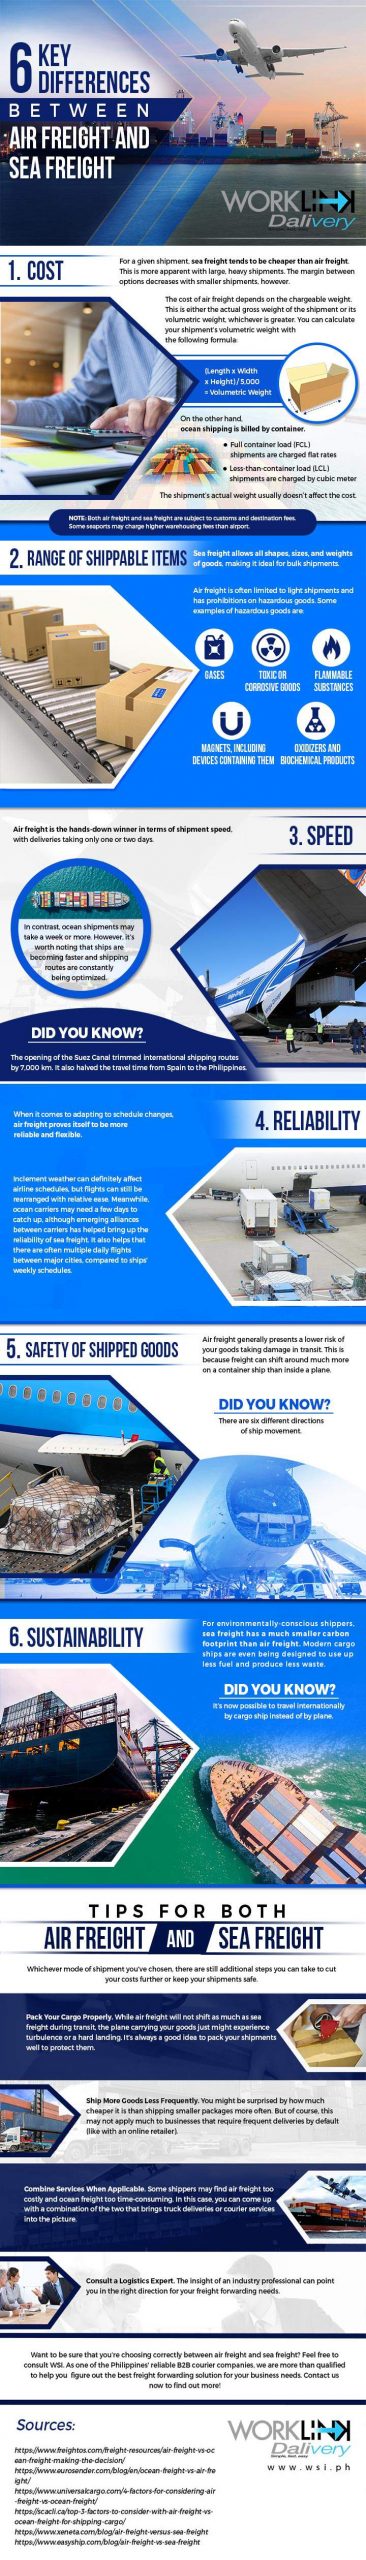 Differences Between Air Freight and Sea Freight